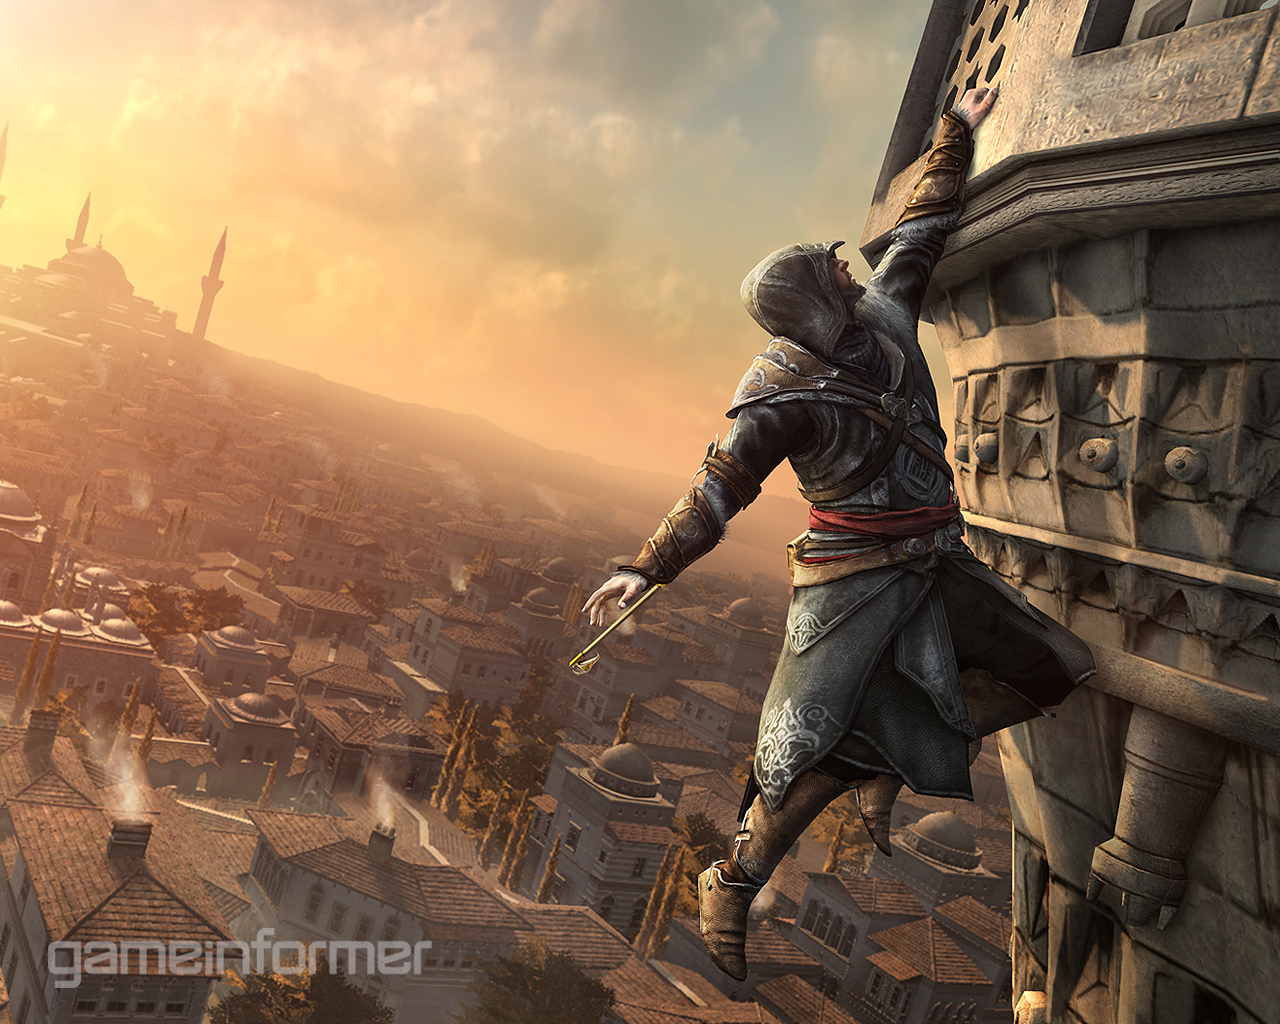 Assassin's Creed Syndicate officially announced